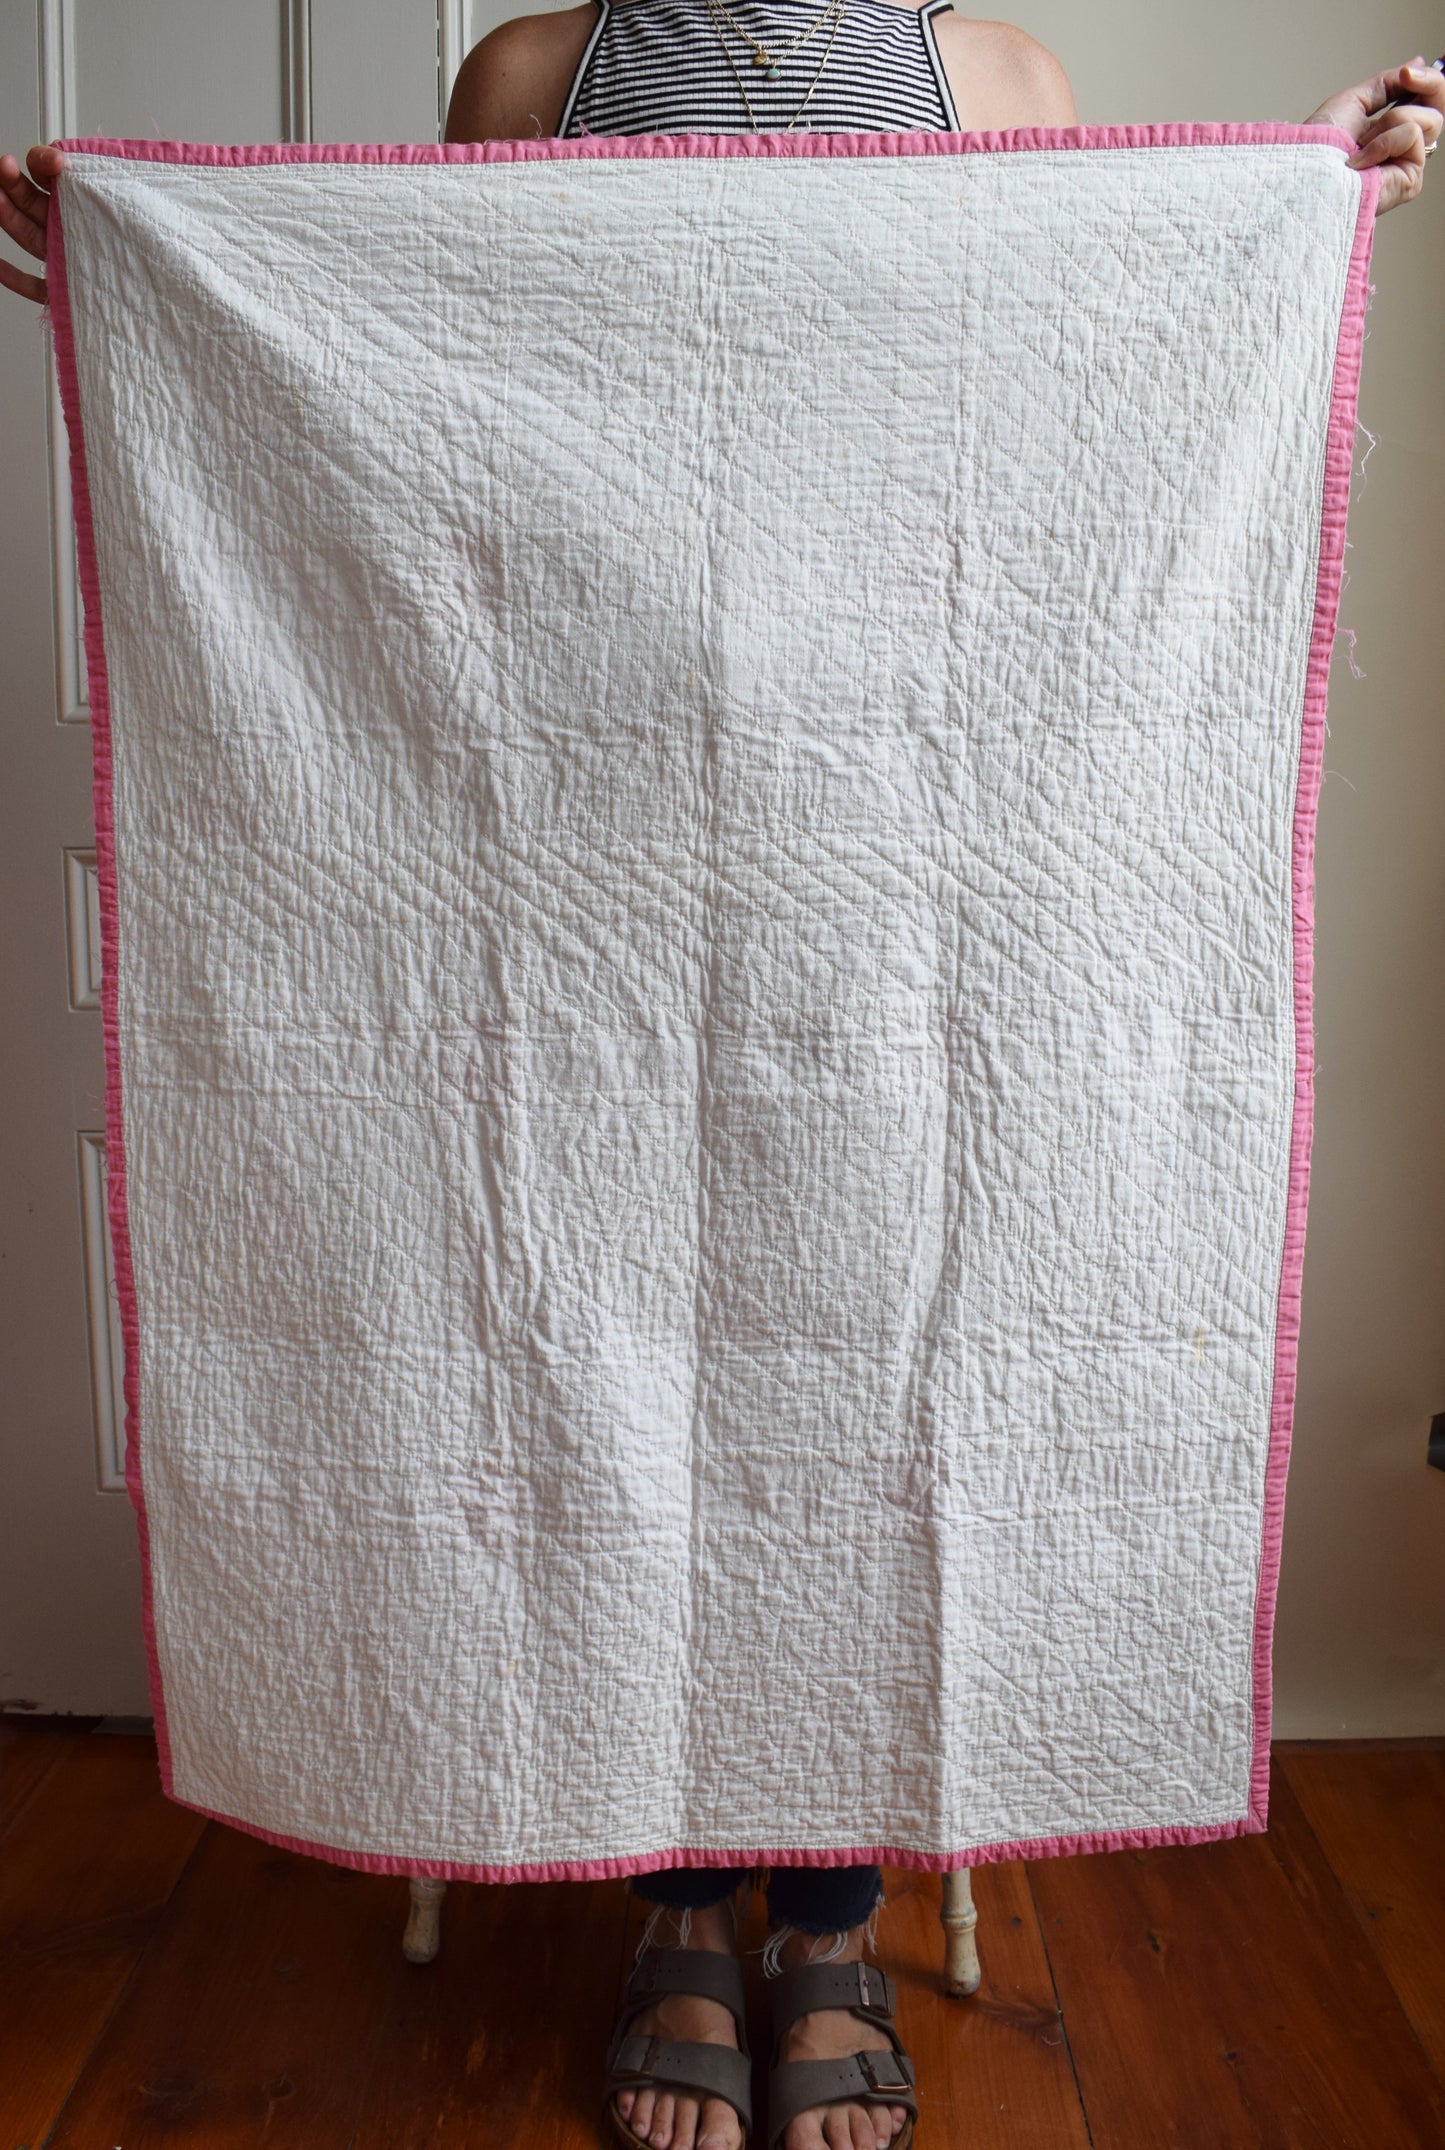 1930s/1940s Small Quilted Throw or Wall Hanging